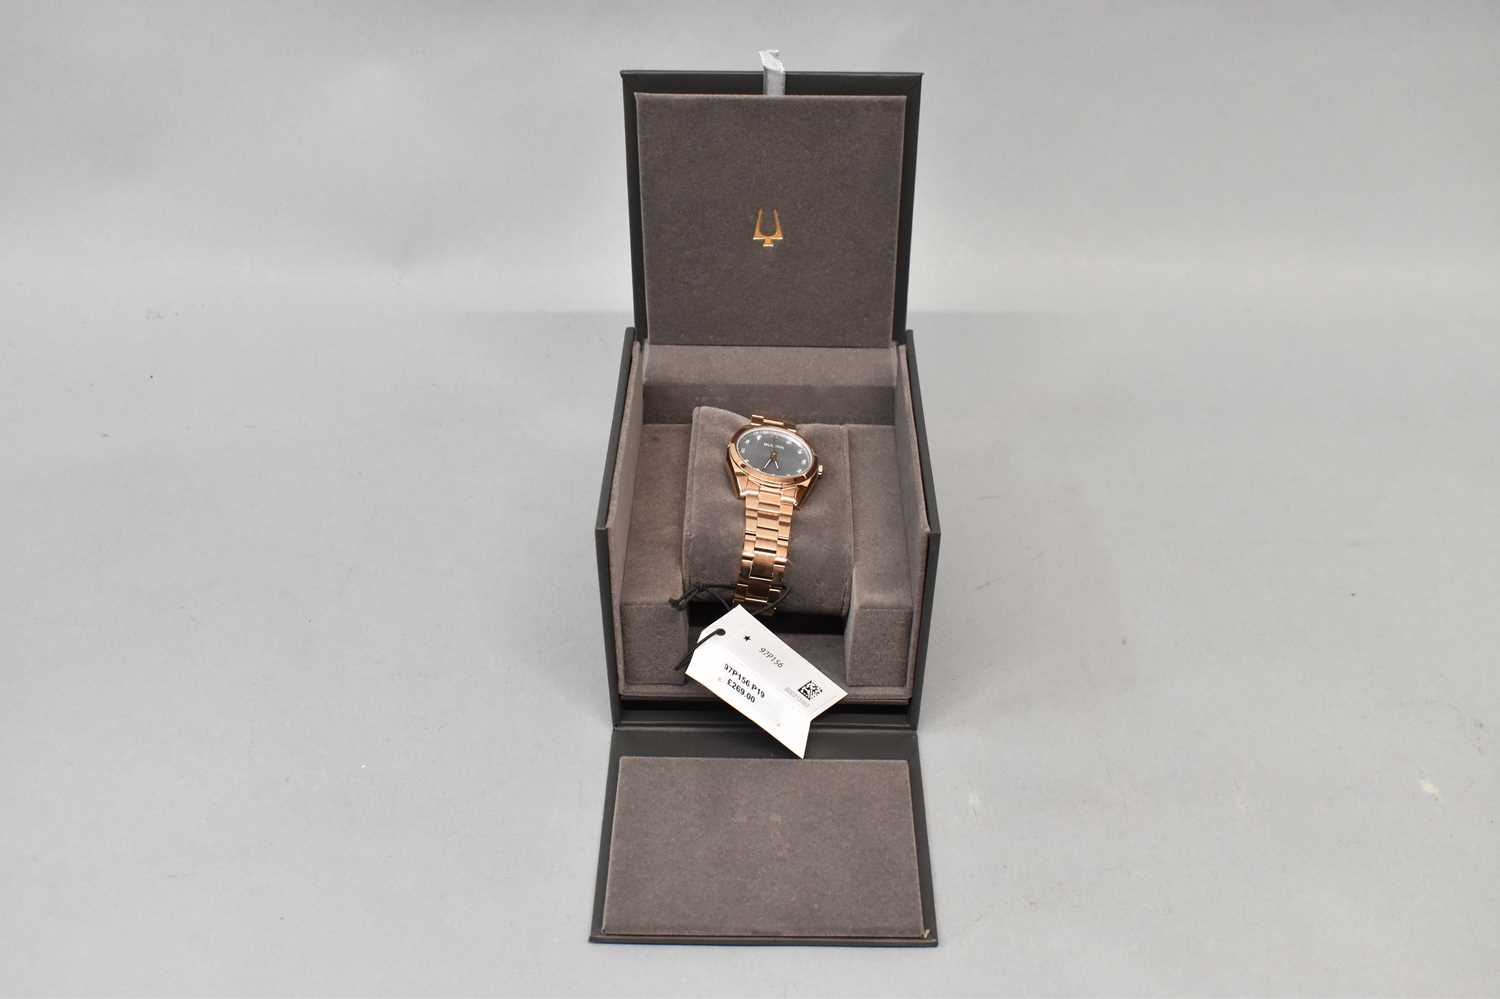 BULOVA; a lady's watch with rose gold plated bracelet, grey face and crystal, boxed and unused.